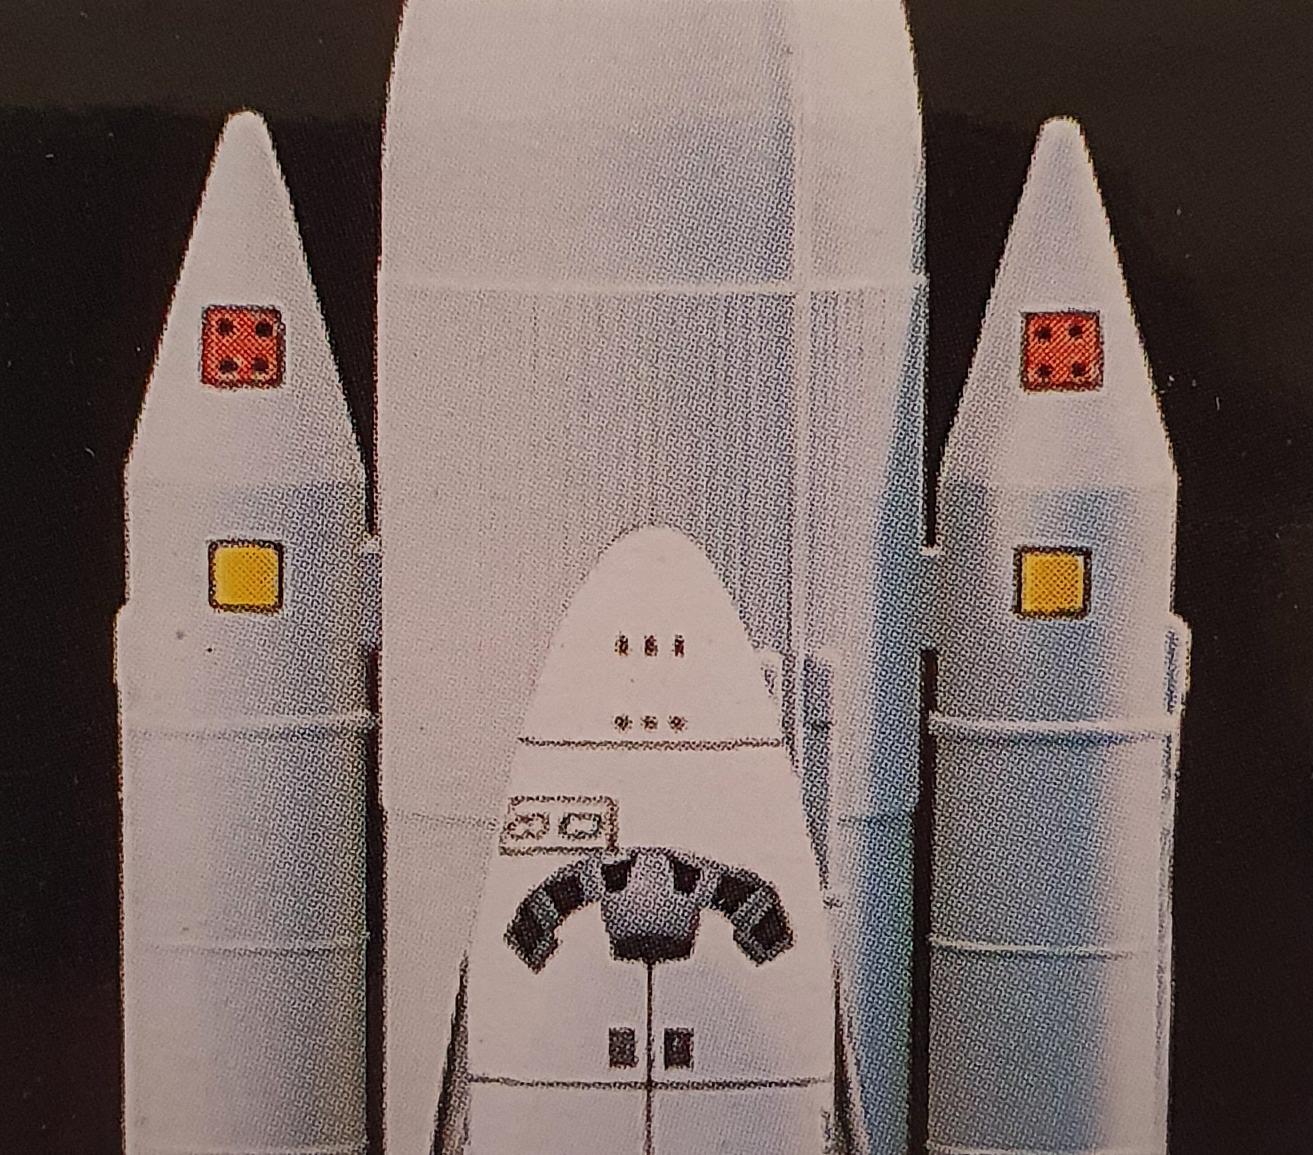 View 3 Academy Space Shuttle & Booster Rockets Model Kit Scale 1:288 12707